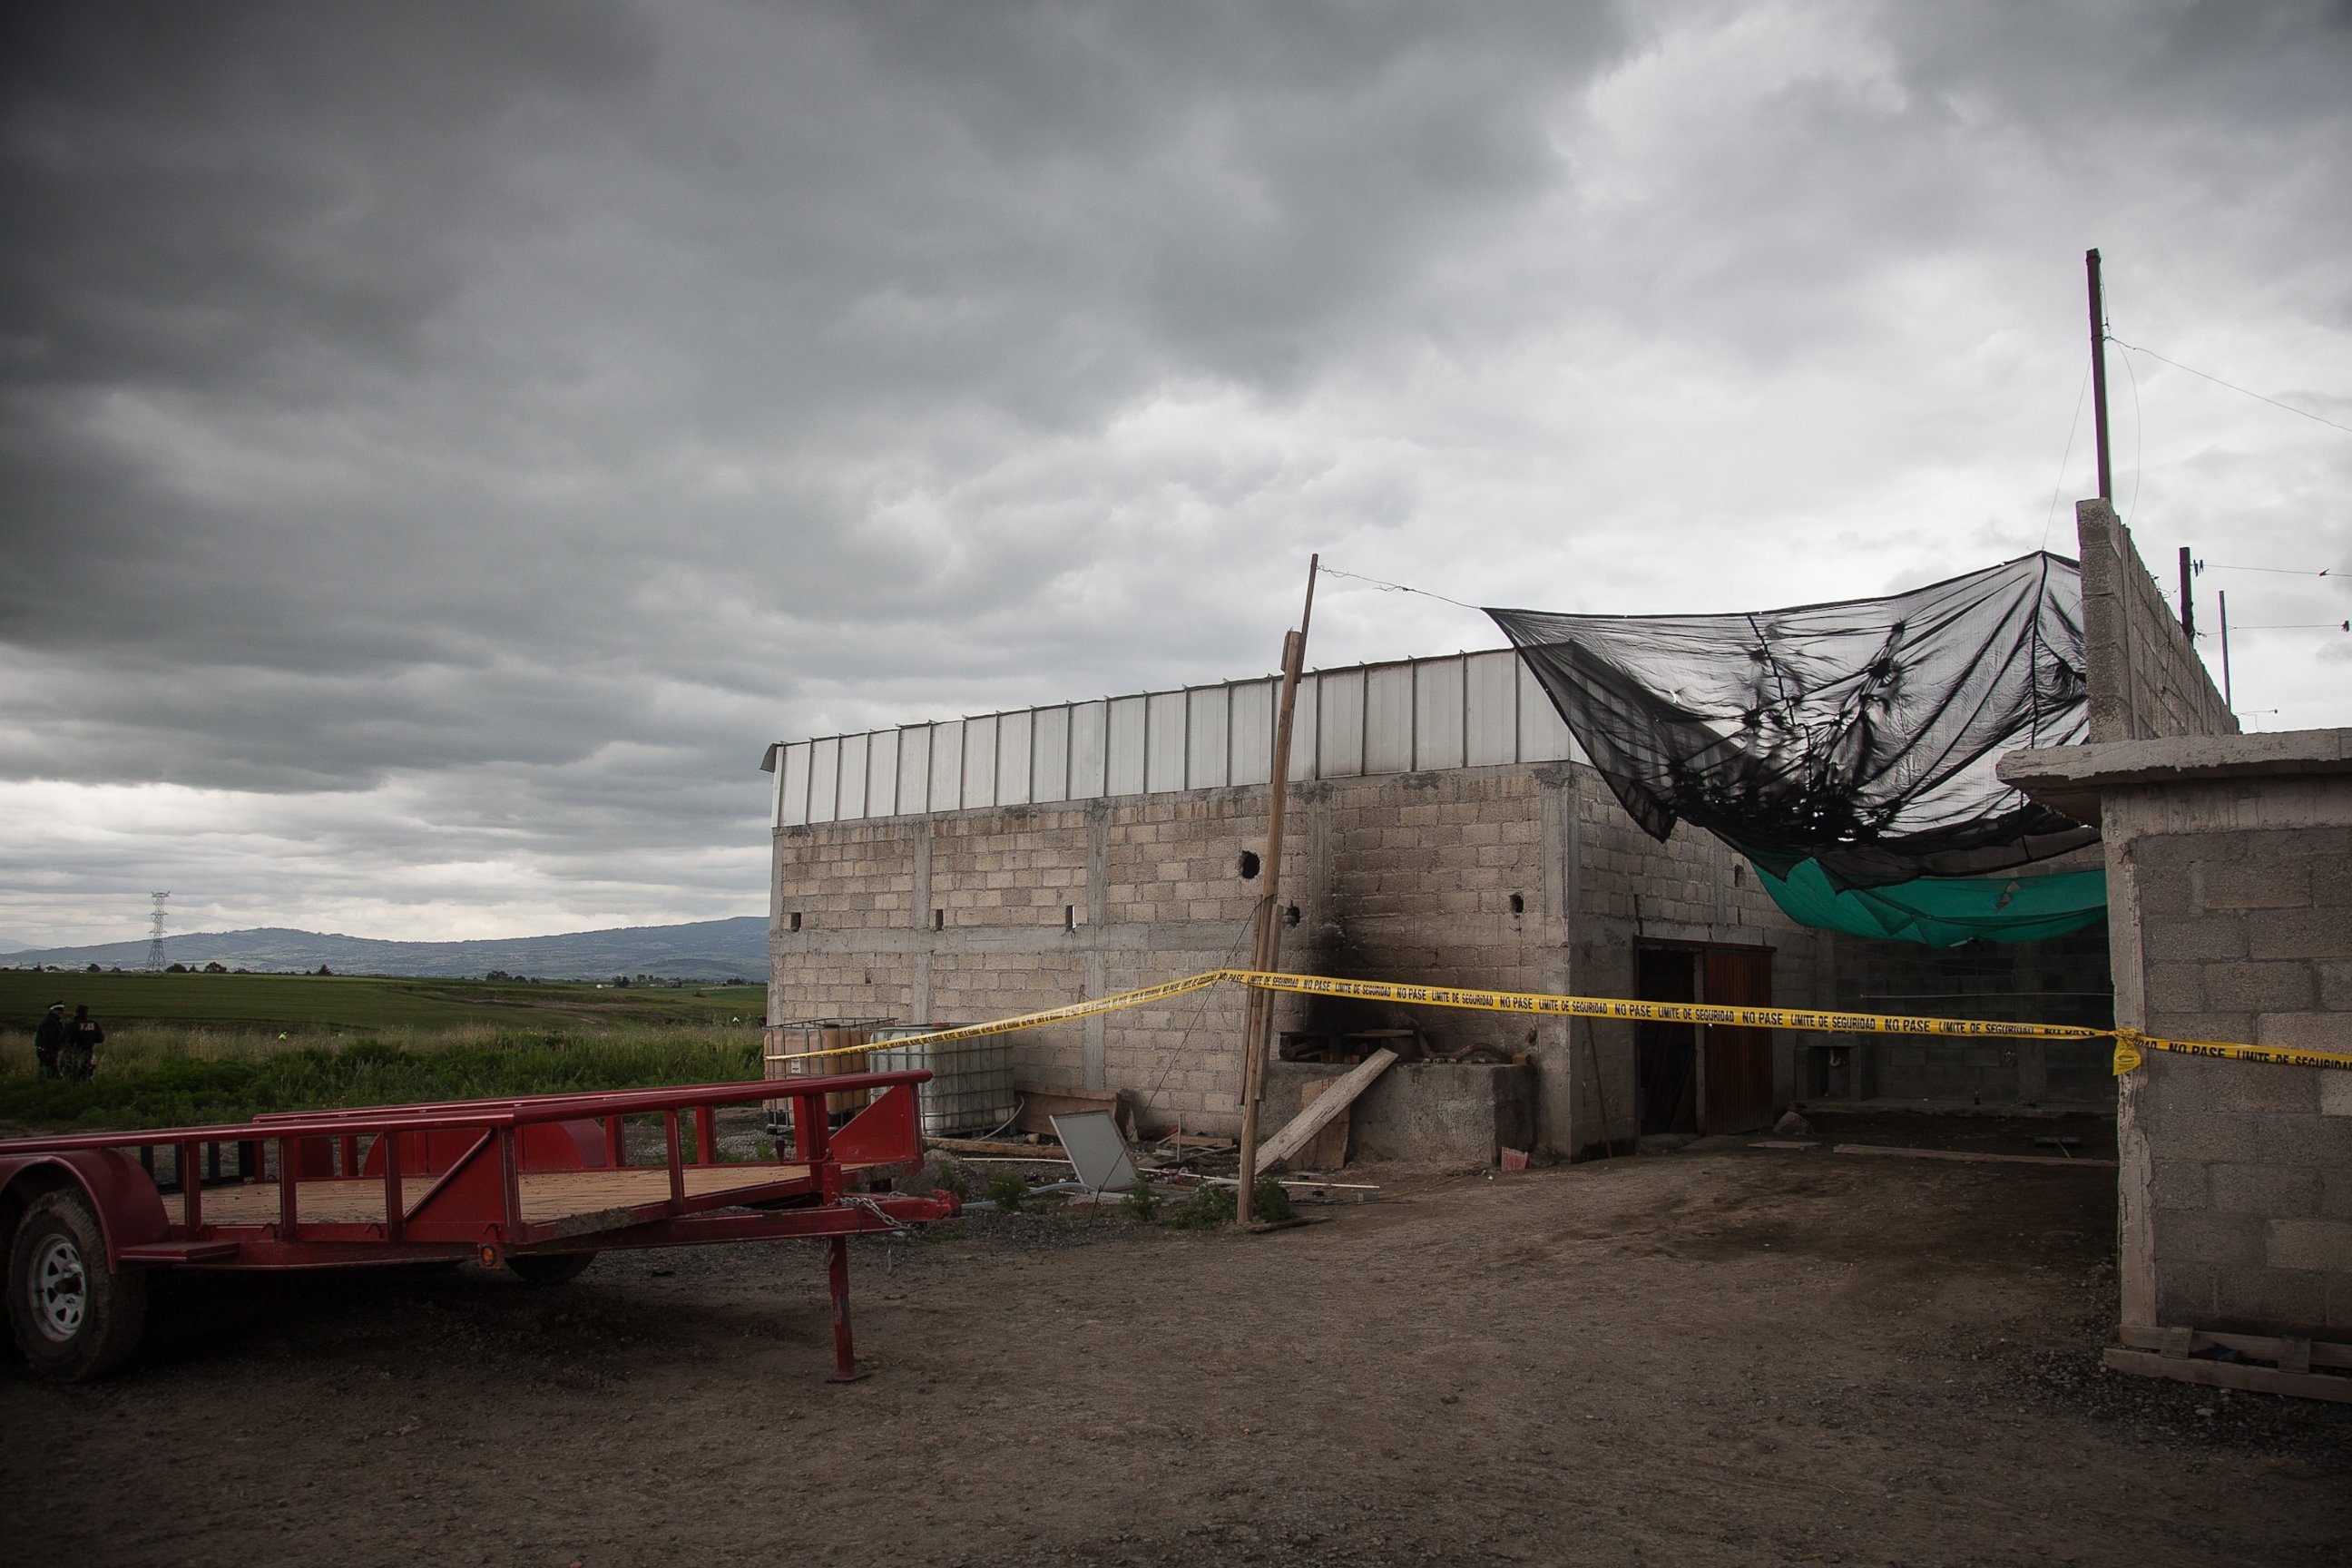 PHOTO: Exterior view of a half-built house used by "El Chapo" to escape from prison near the maximum security prison of Altiplano in Almoloya de Juarez, state of Mexico on July 12, 2015.